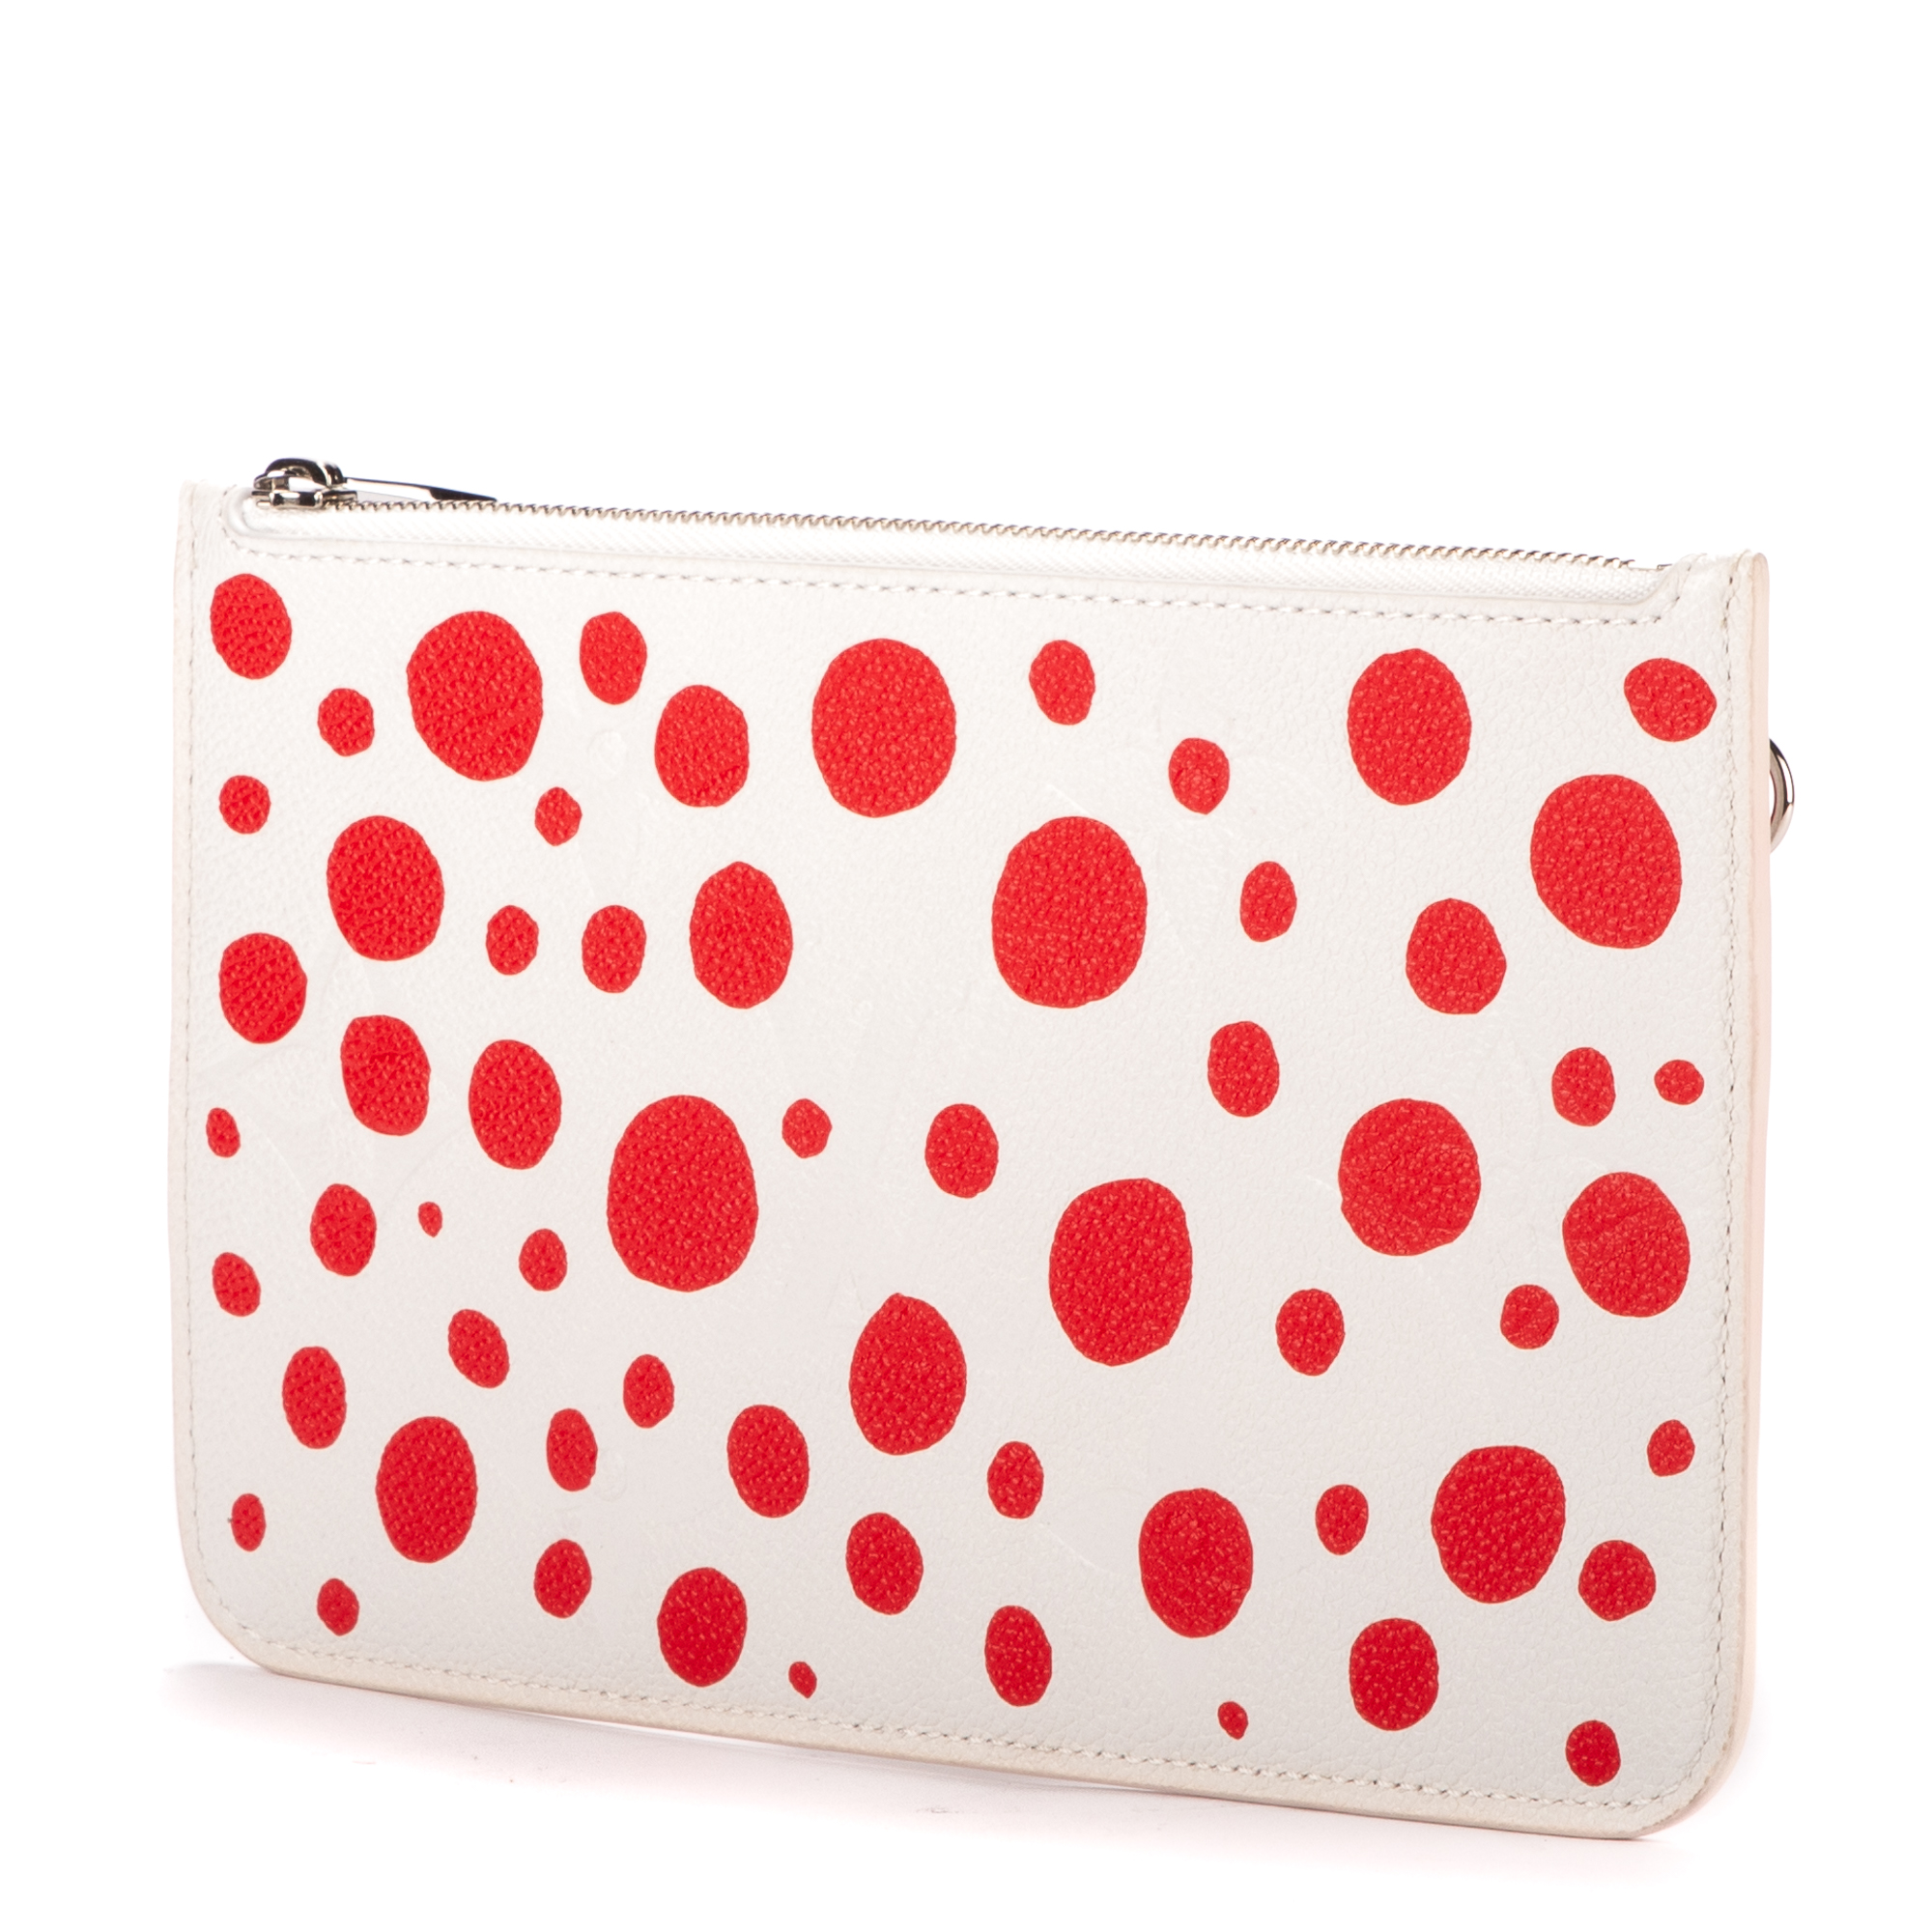 Louis Vuitton X Yayoi Kusama: 5 Dotted Bags To Dote Over